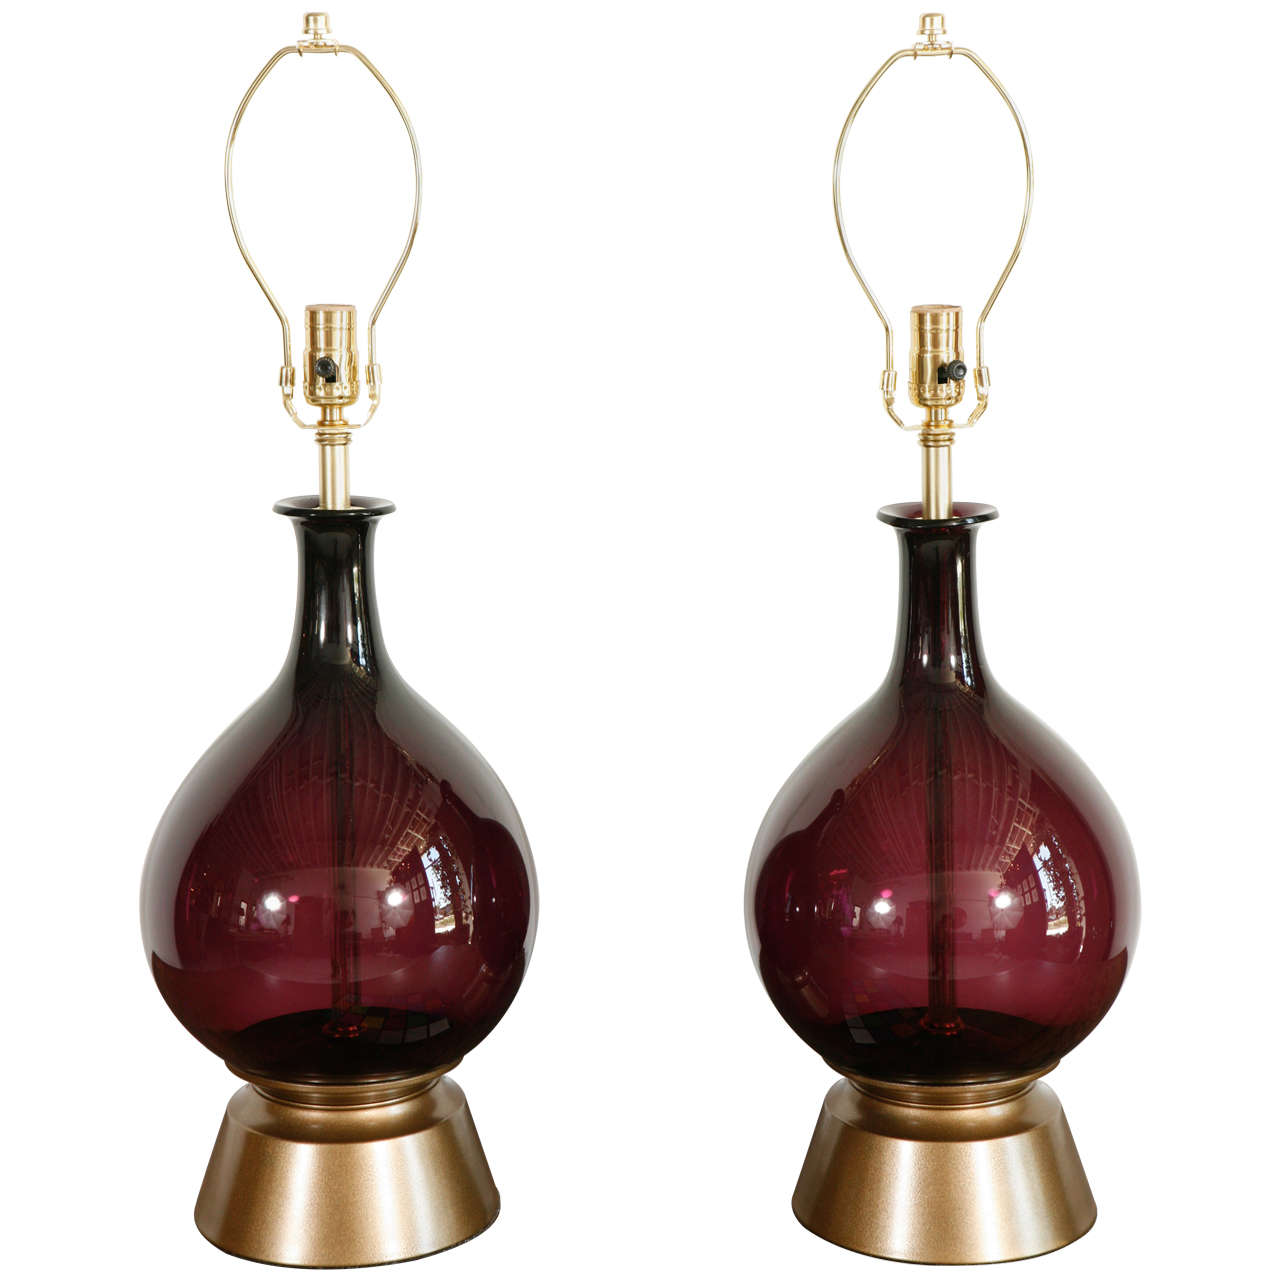 Pair of Amethyst Blown Glass Lamps